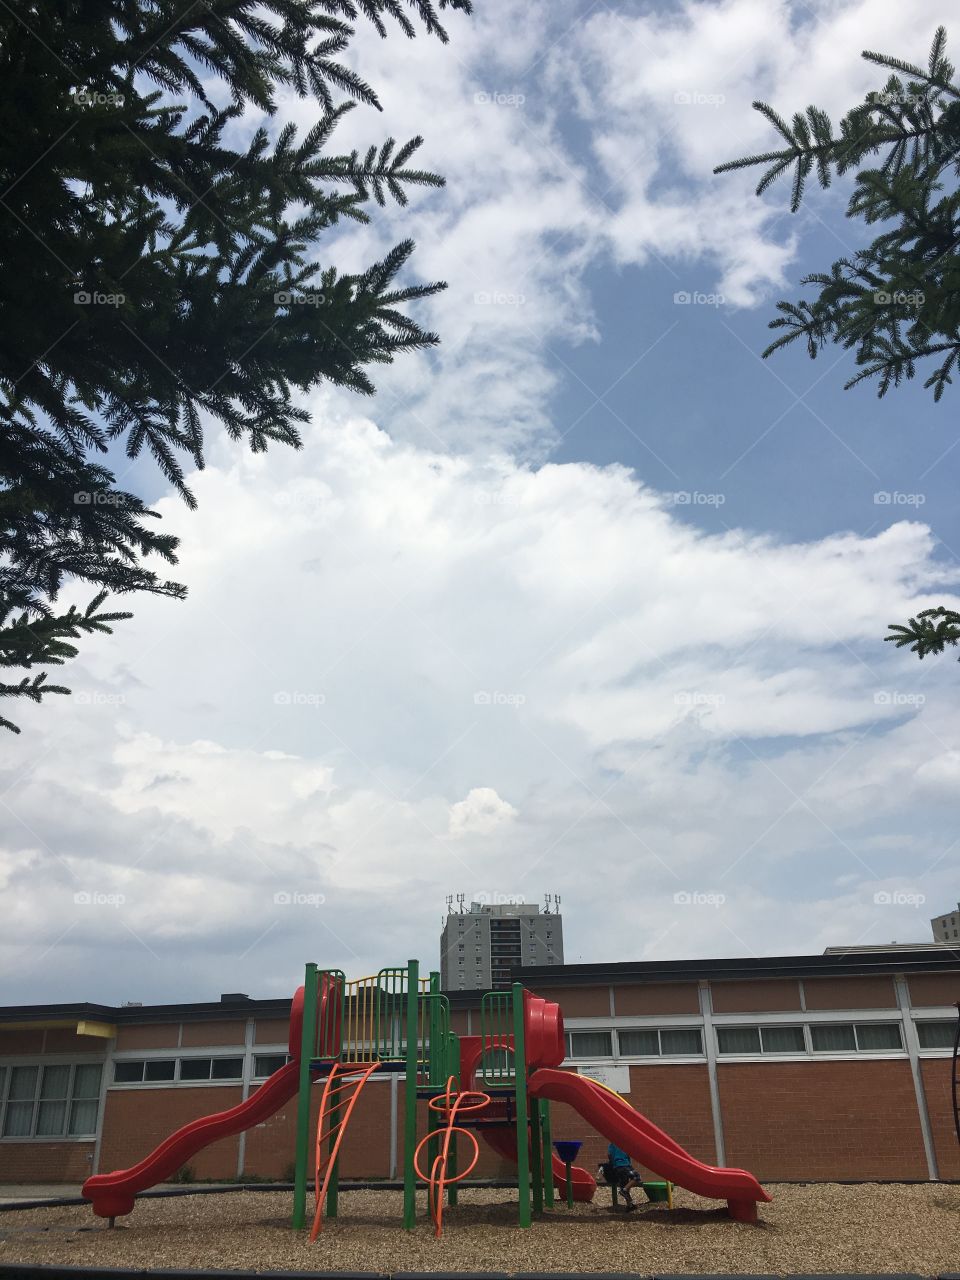 Clouds above the play ground